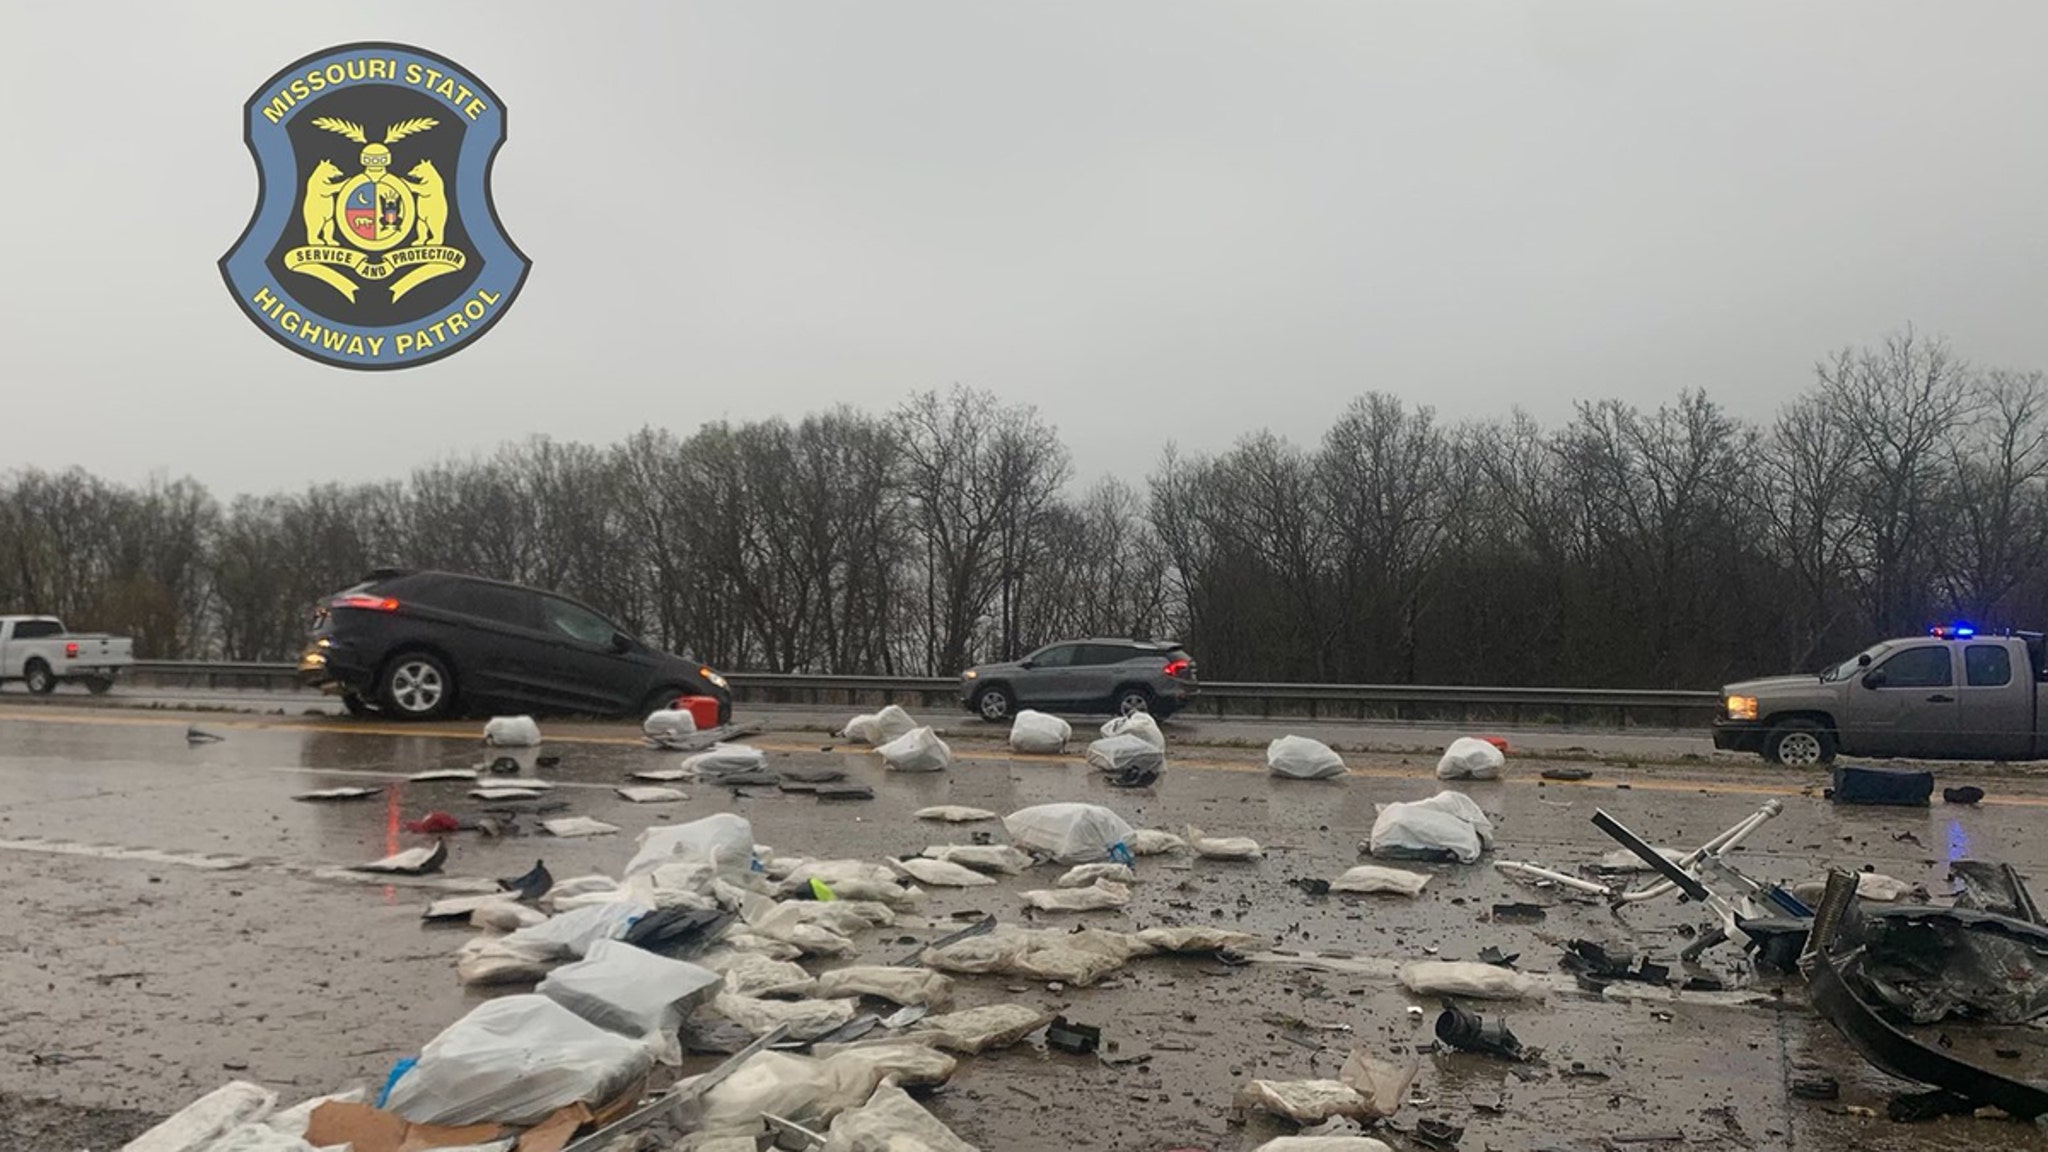 500 Pounds of Weed Spill on Missouri Highway, Cops Say 'It's 4/20'